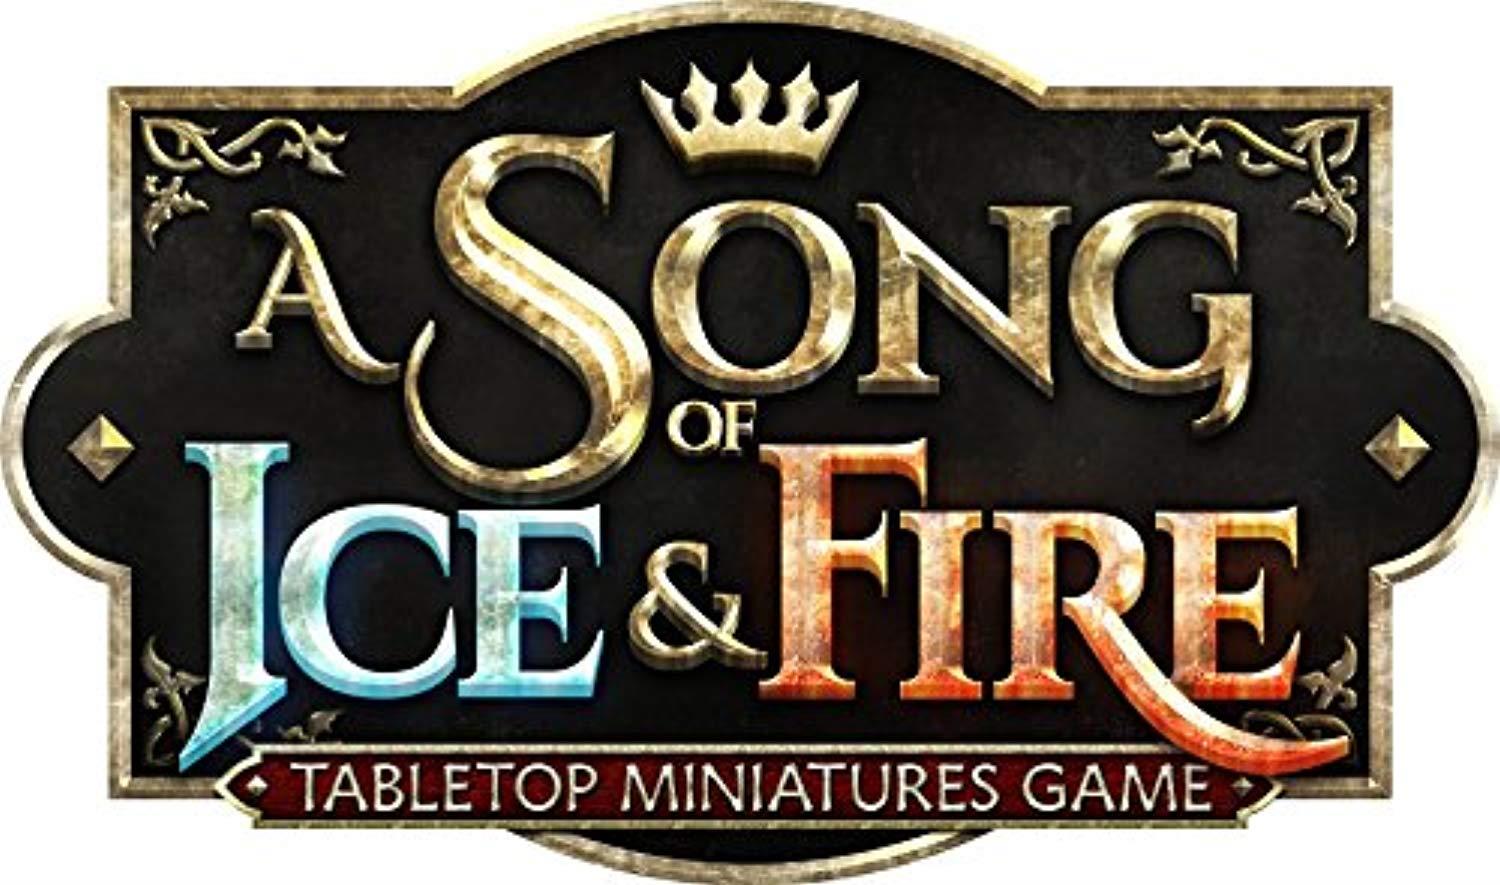 Cmon A Song of Ice & Fire: Tabletop Miniatures Game - Stark Vs Lannister Starter Set - image 4 of 4